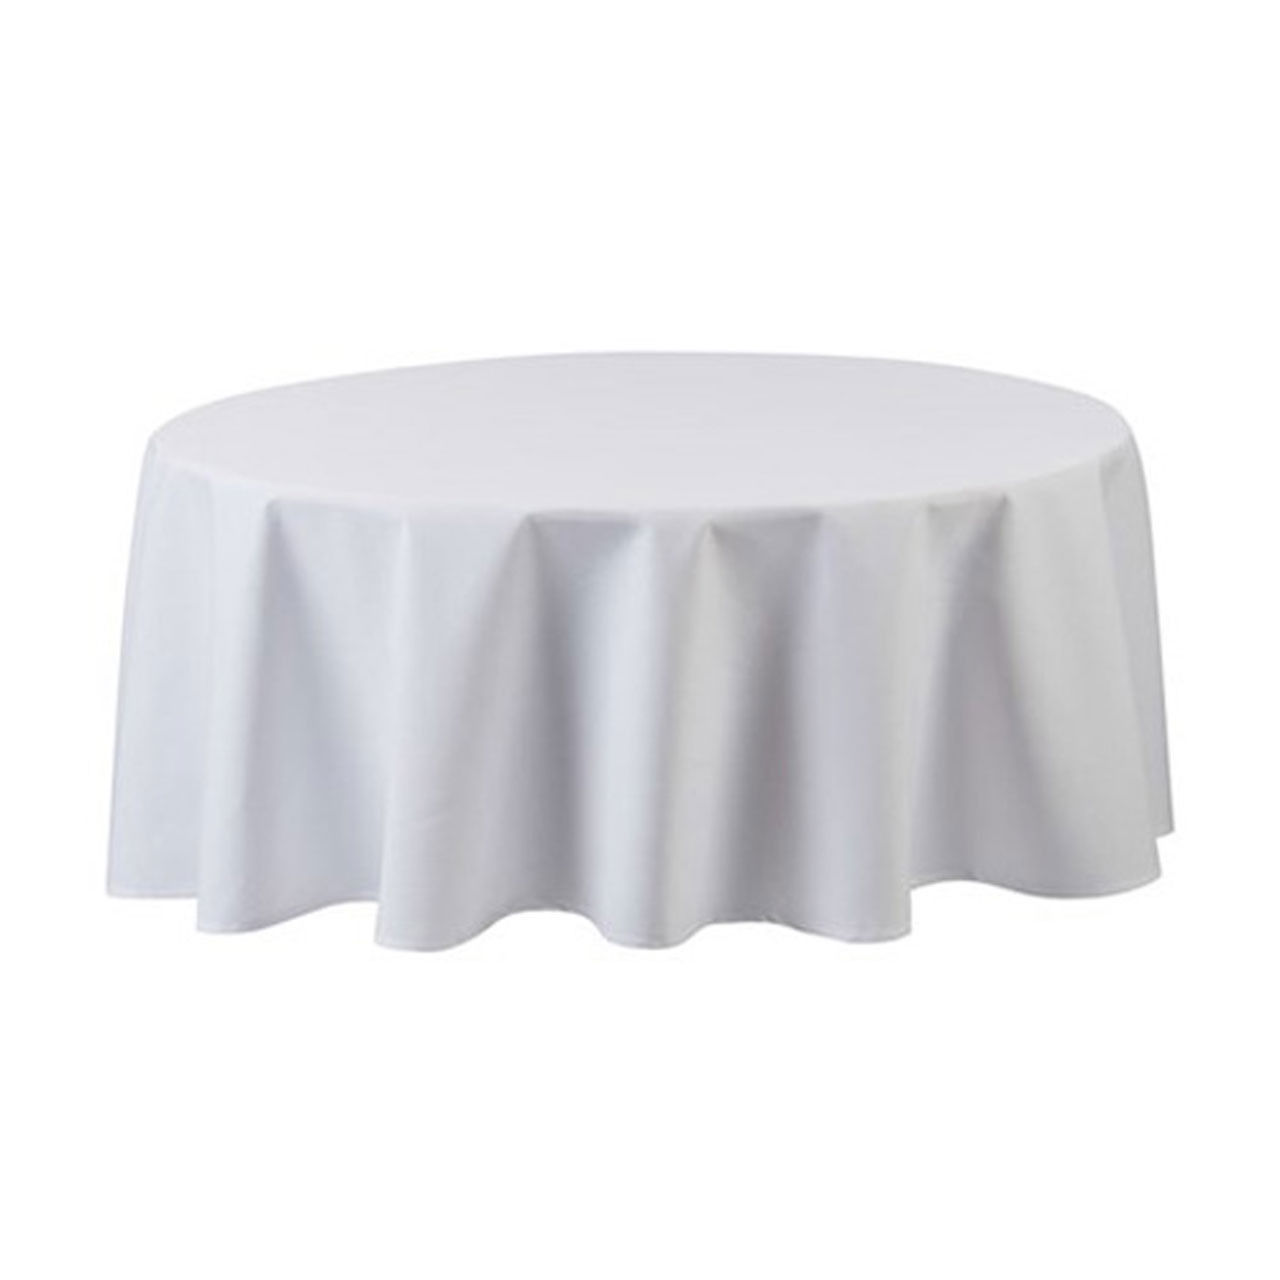 What are the ideal uses for the 120 round tablecloth?